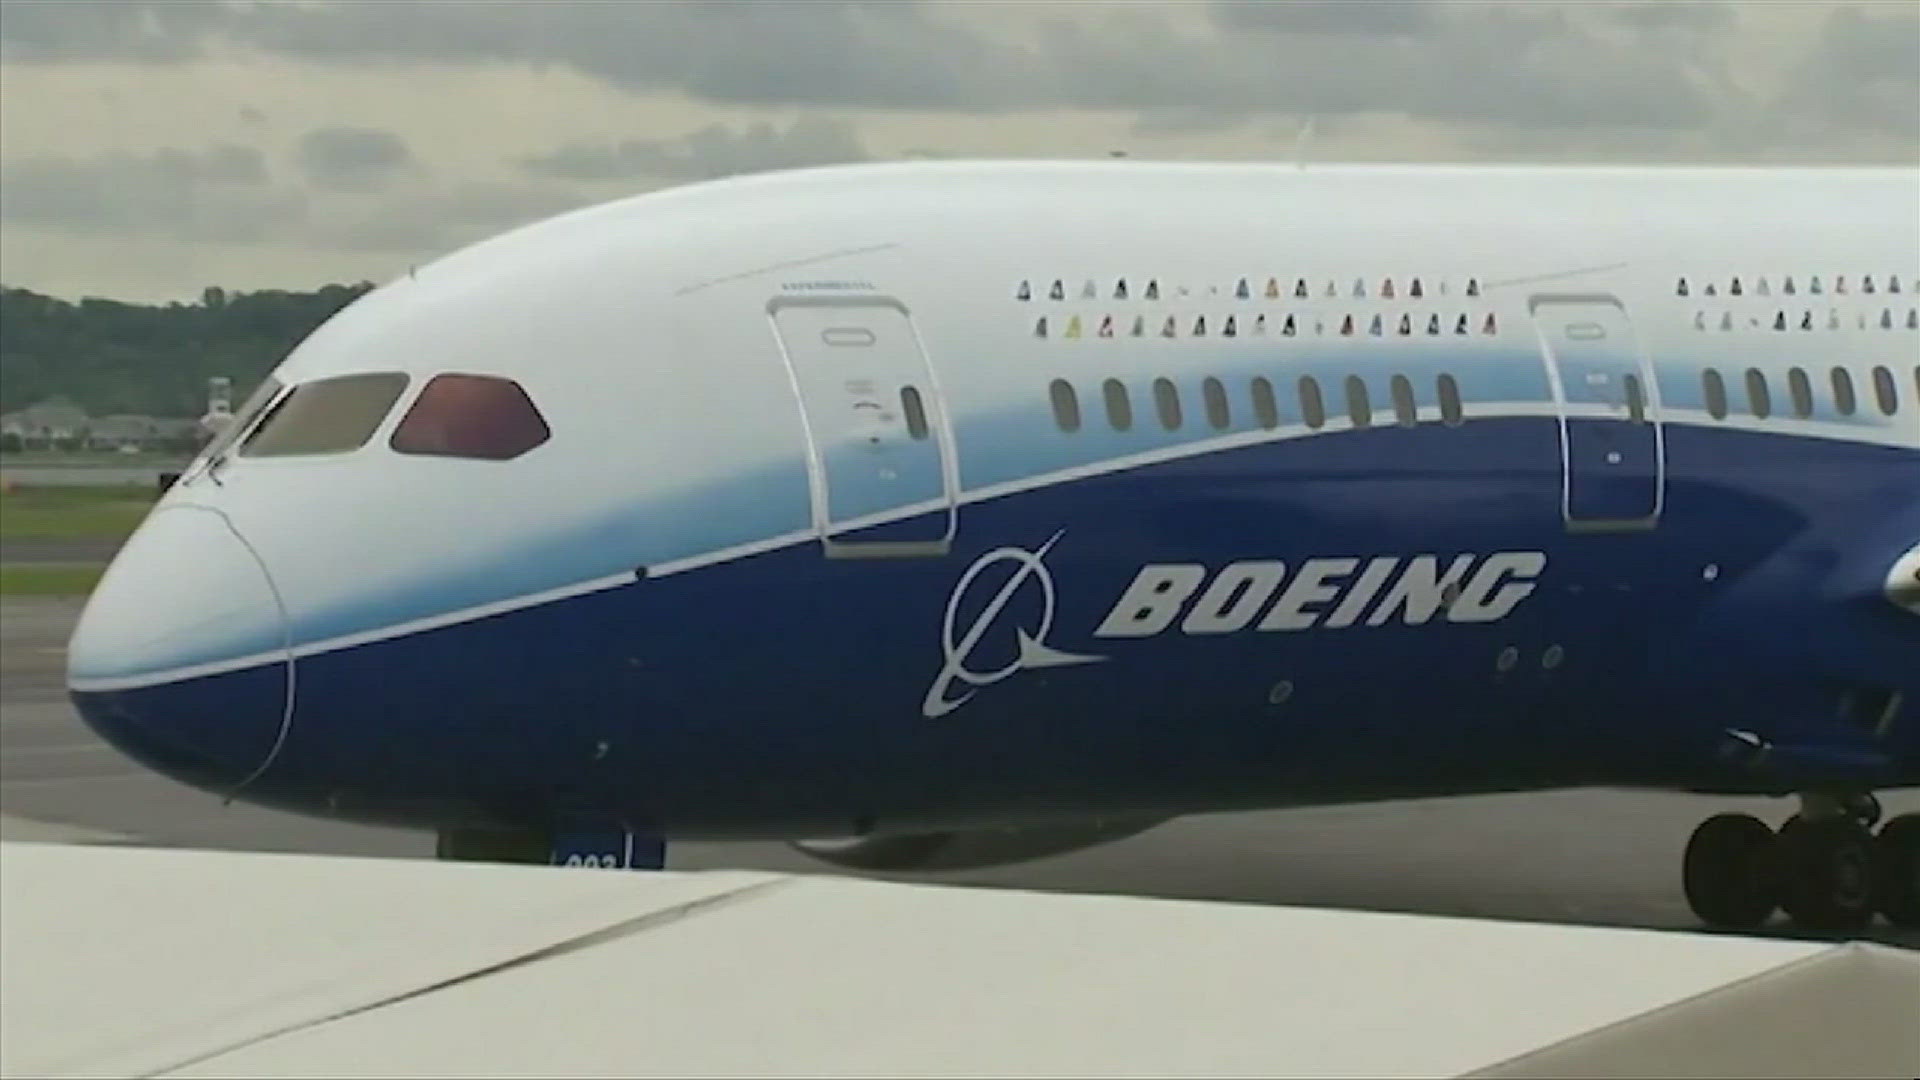 Boeing is making headlines. The company is weighing a big decision that could show how serious they are about learning from past mistakes.